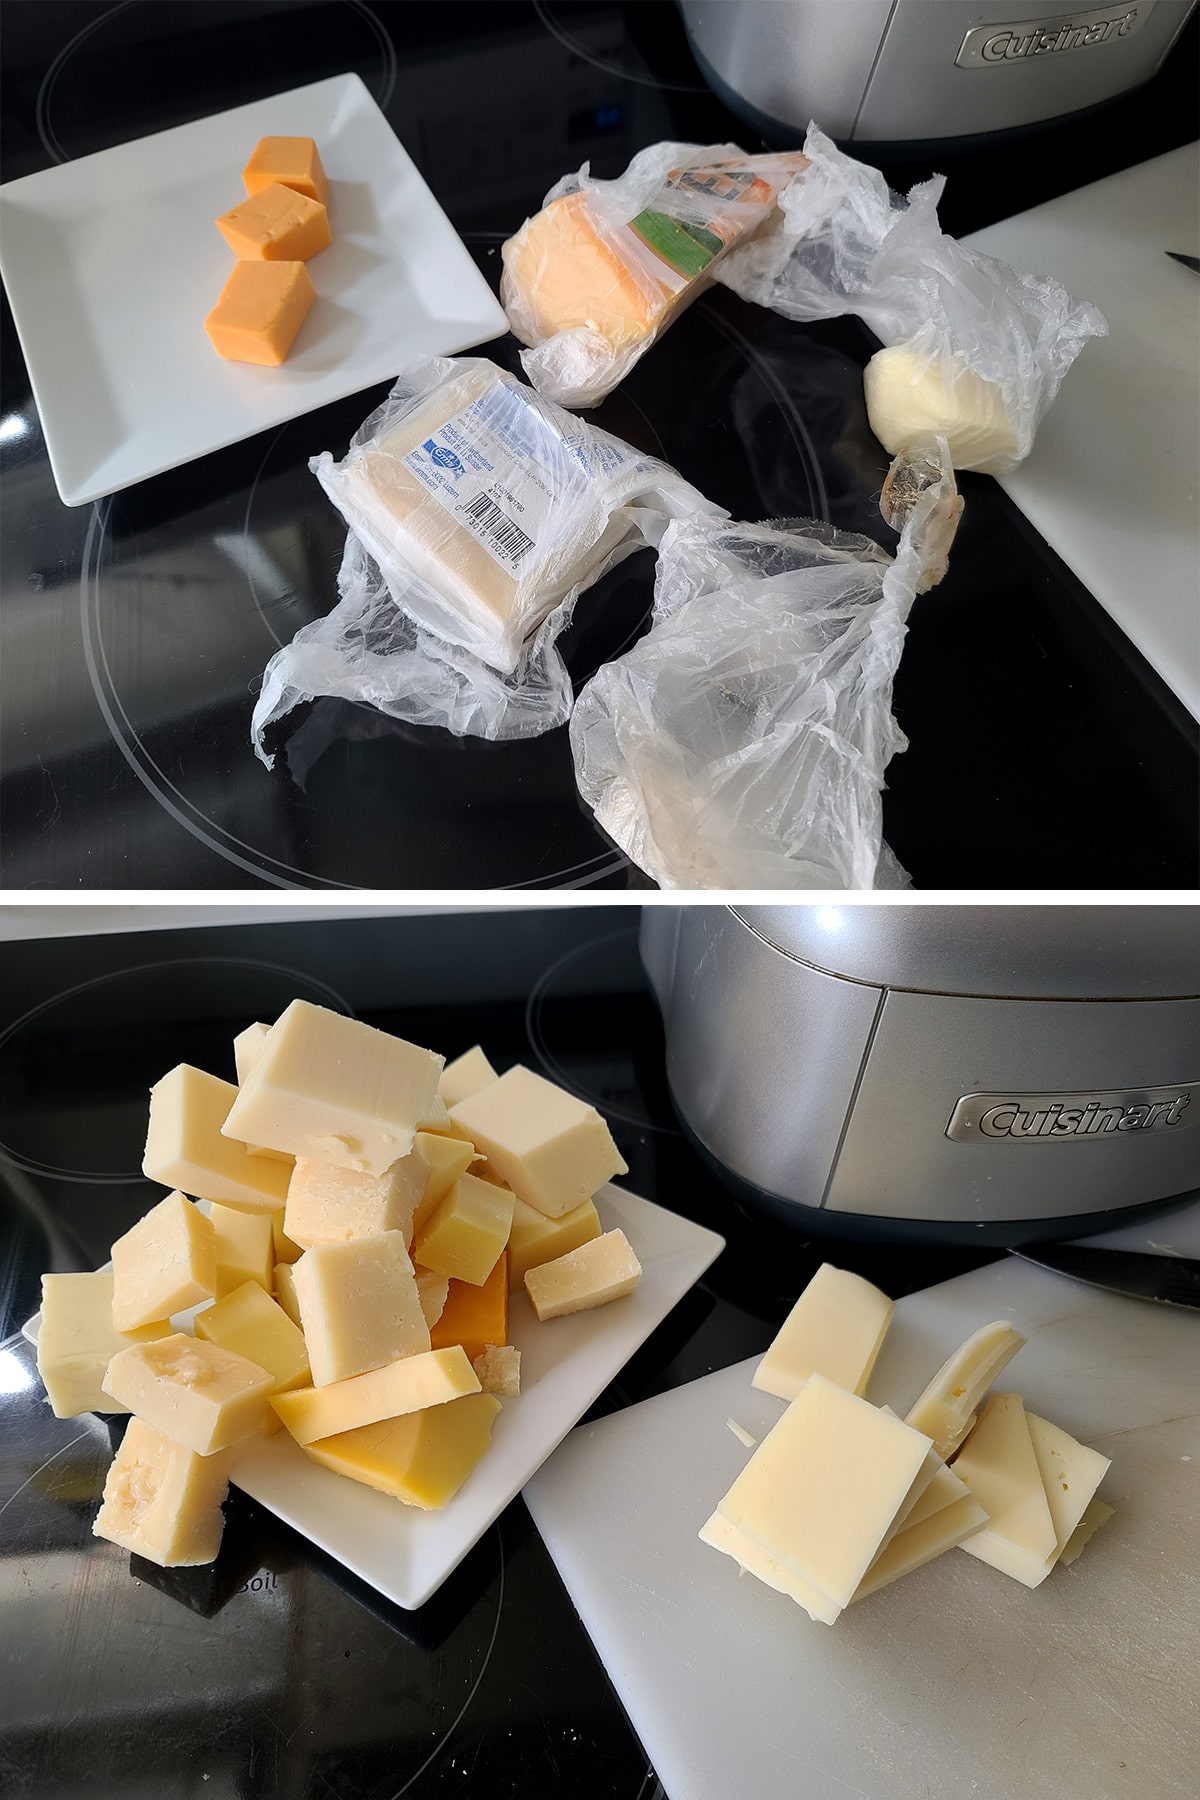 Several pieces of cheese being trimmed and chopped into pieces.